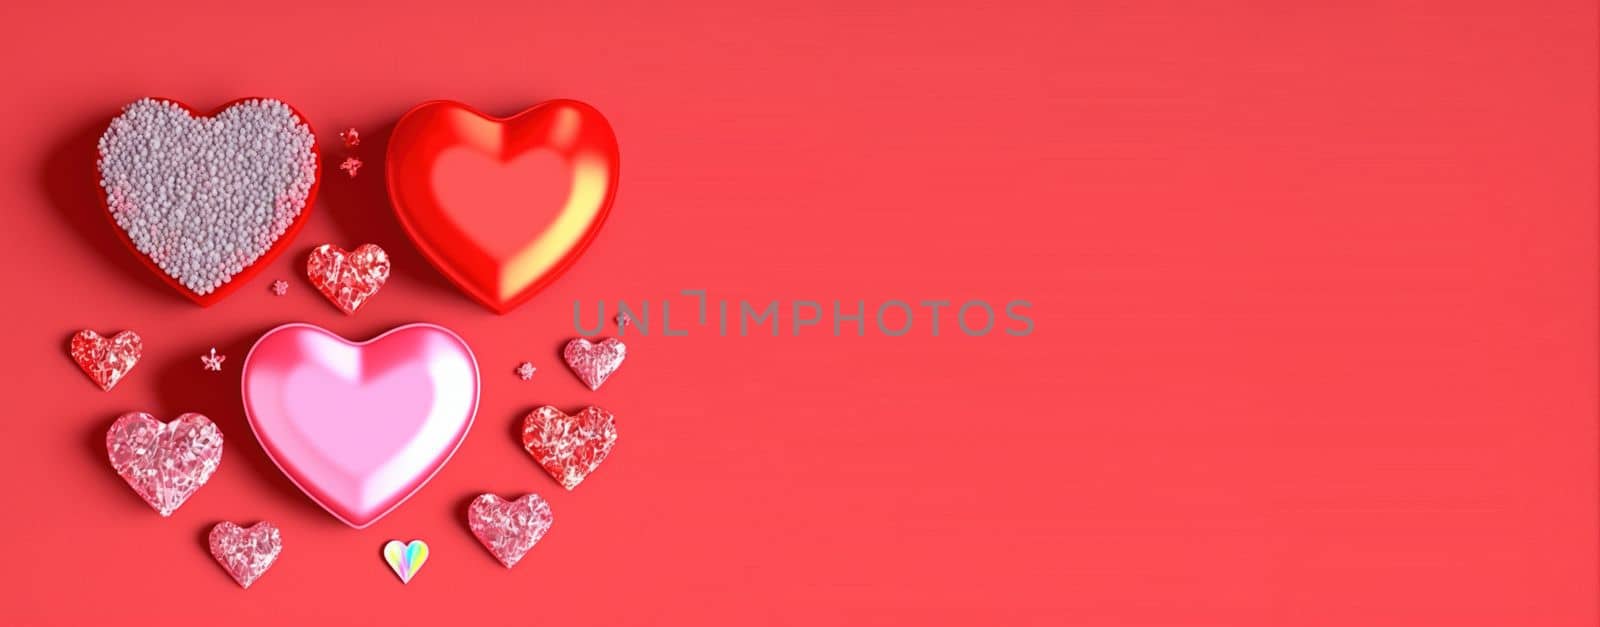 Luxurious 3D Heart, Diamond, and Crystal Illustration for Valentine's Day Background and Banner by templator